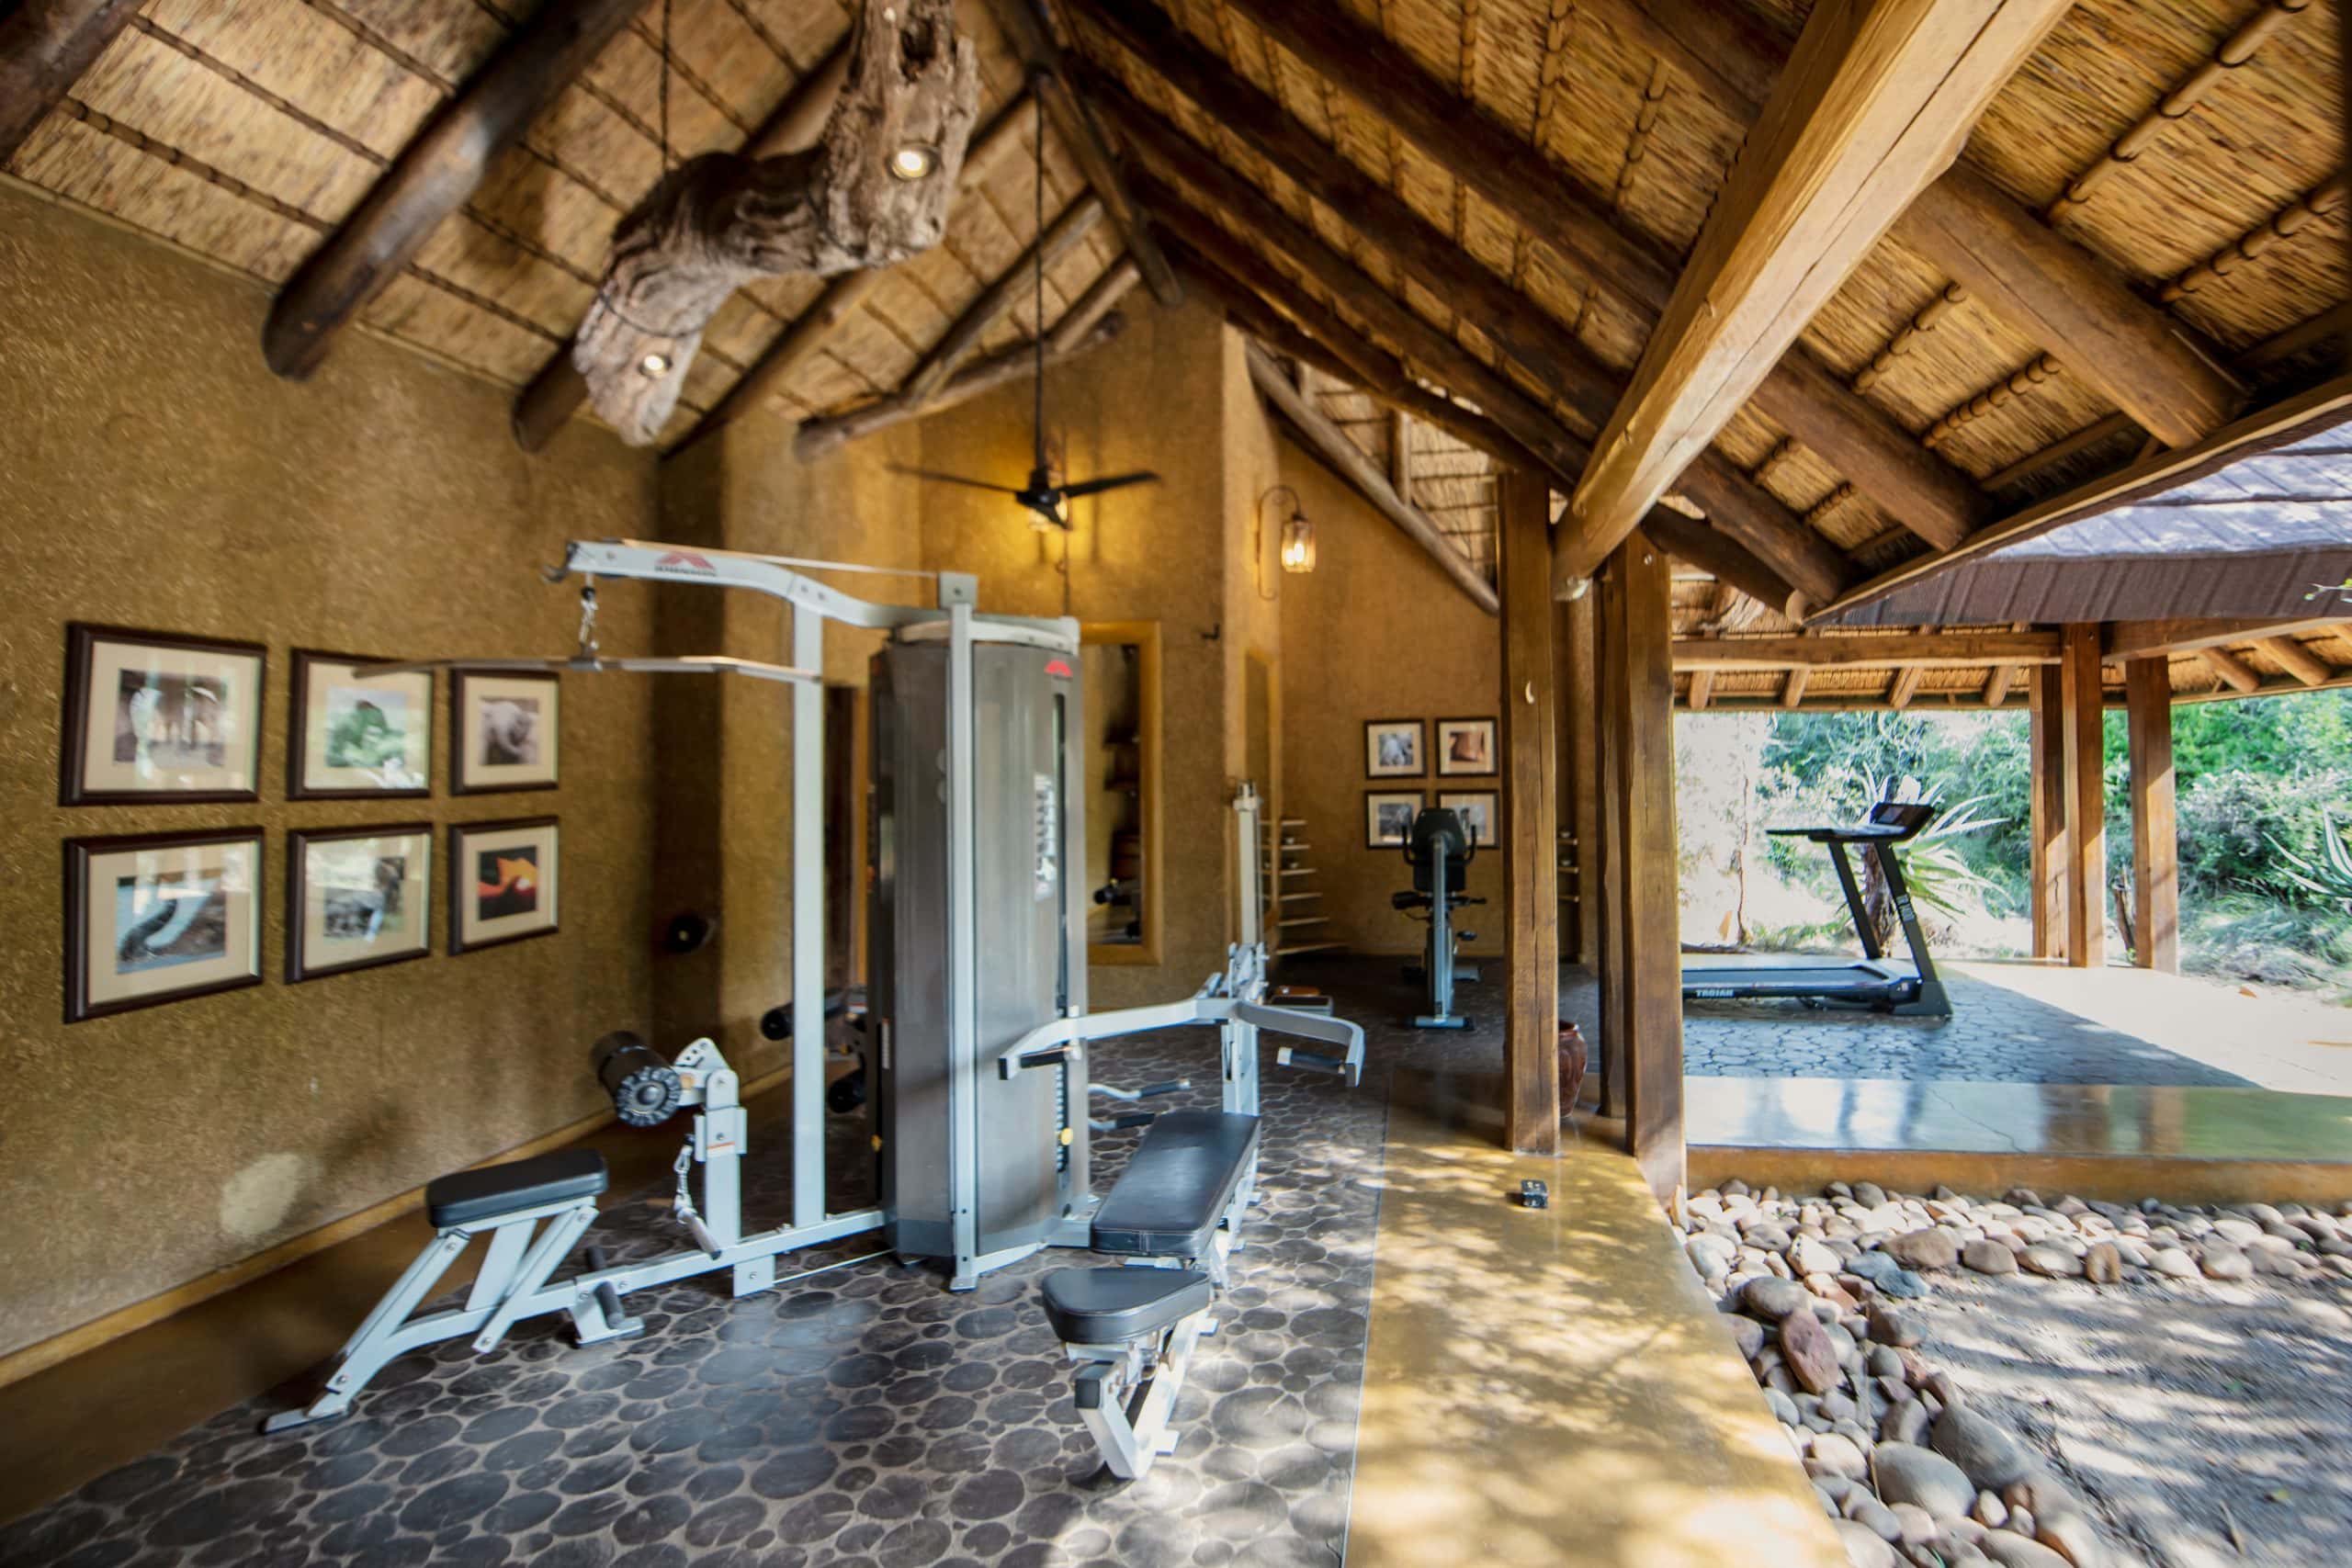 5 Ways to Stay Fit & Healthy on Safari